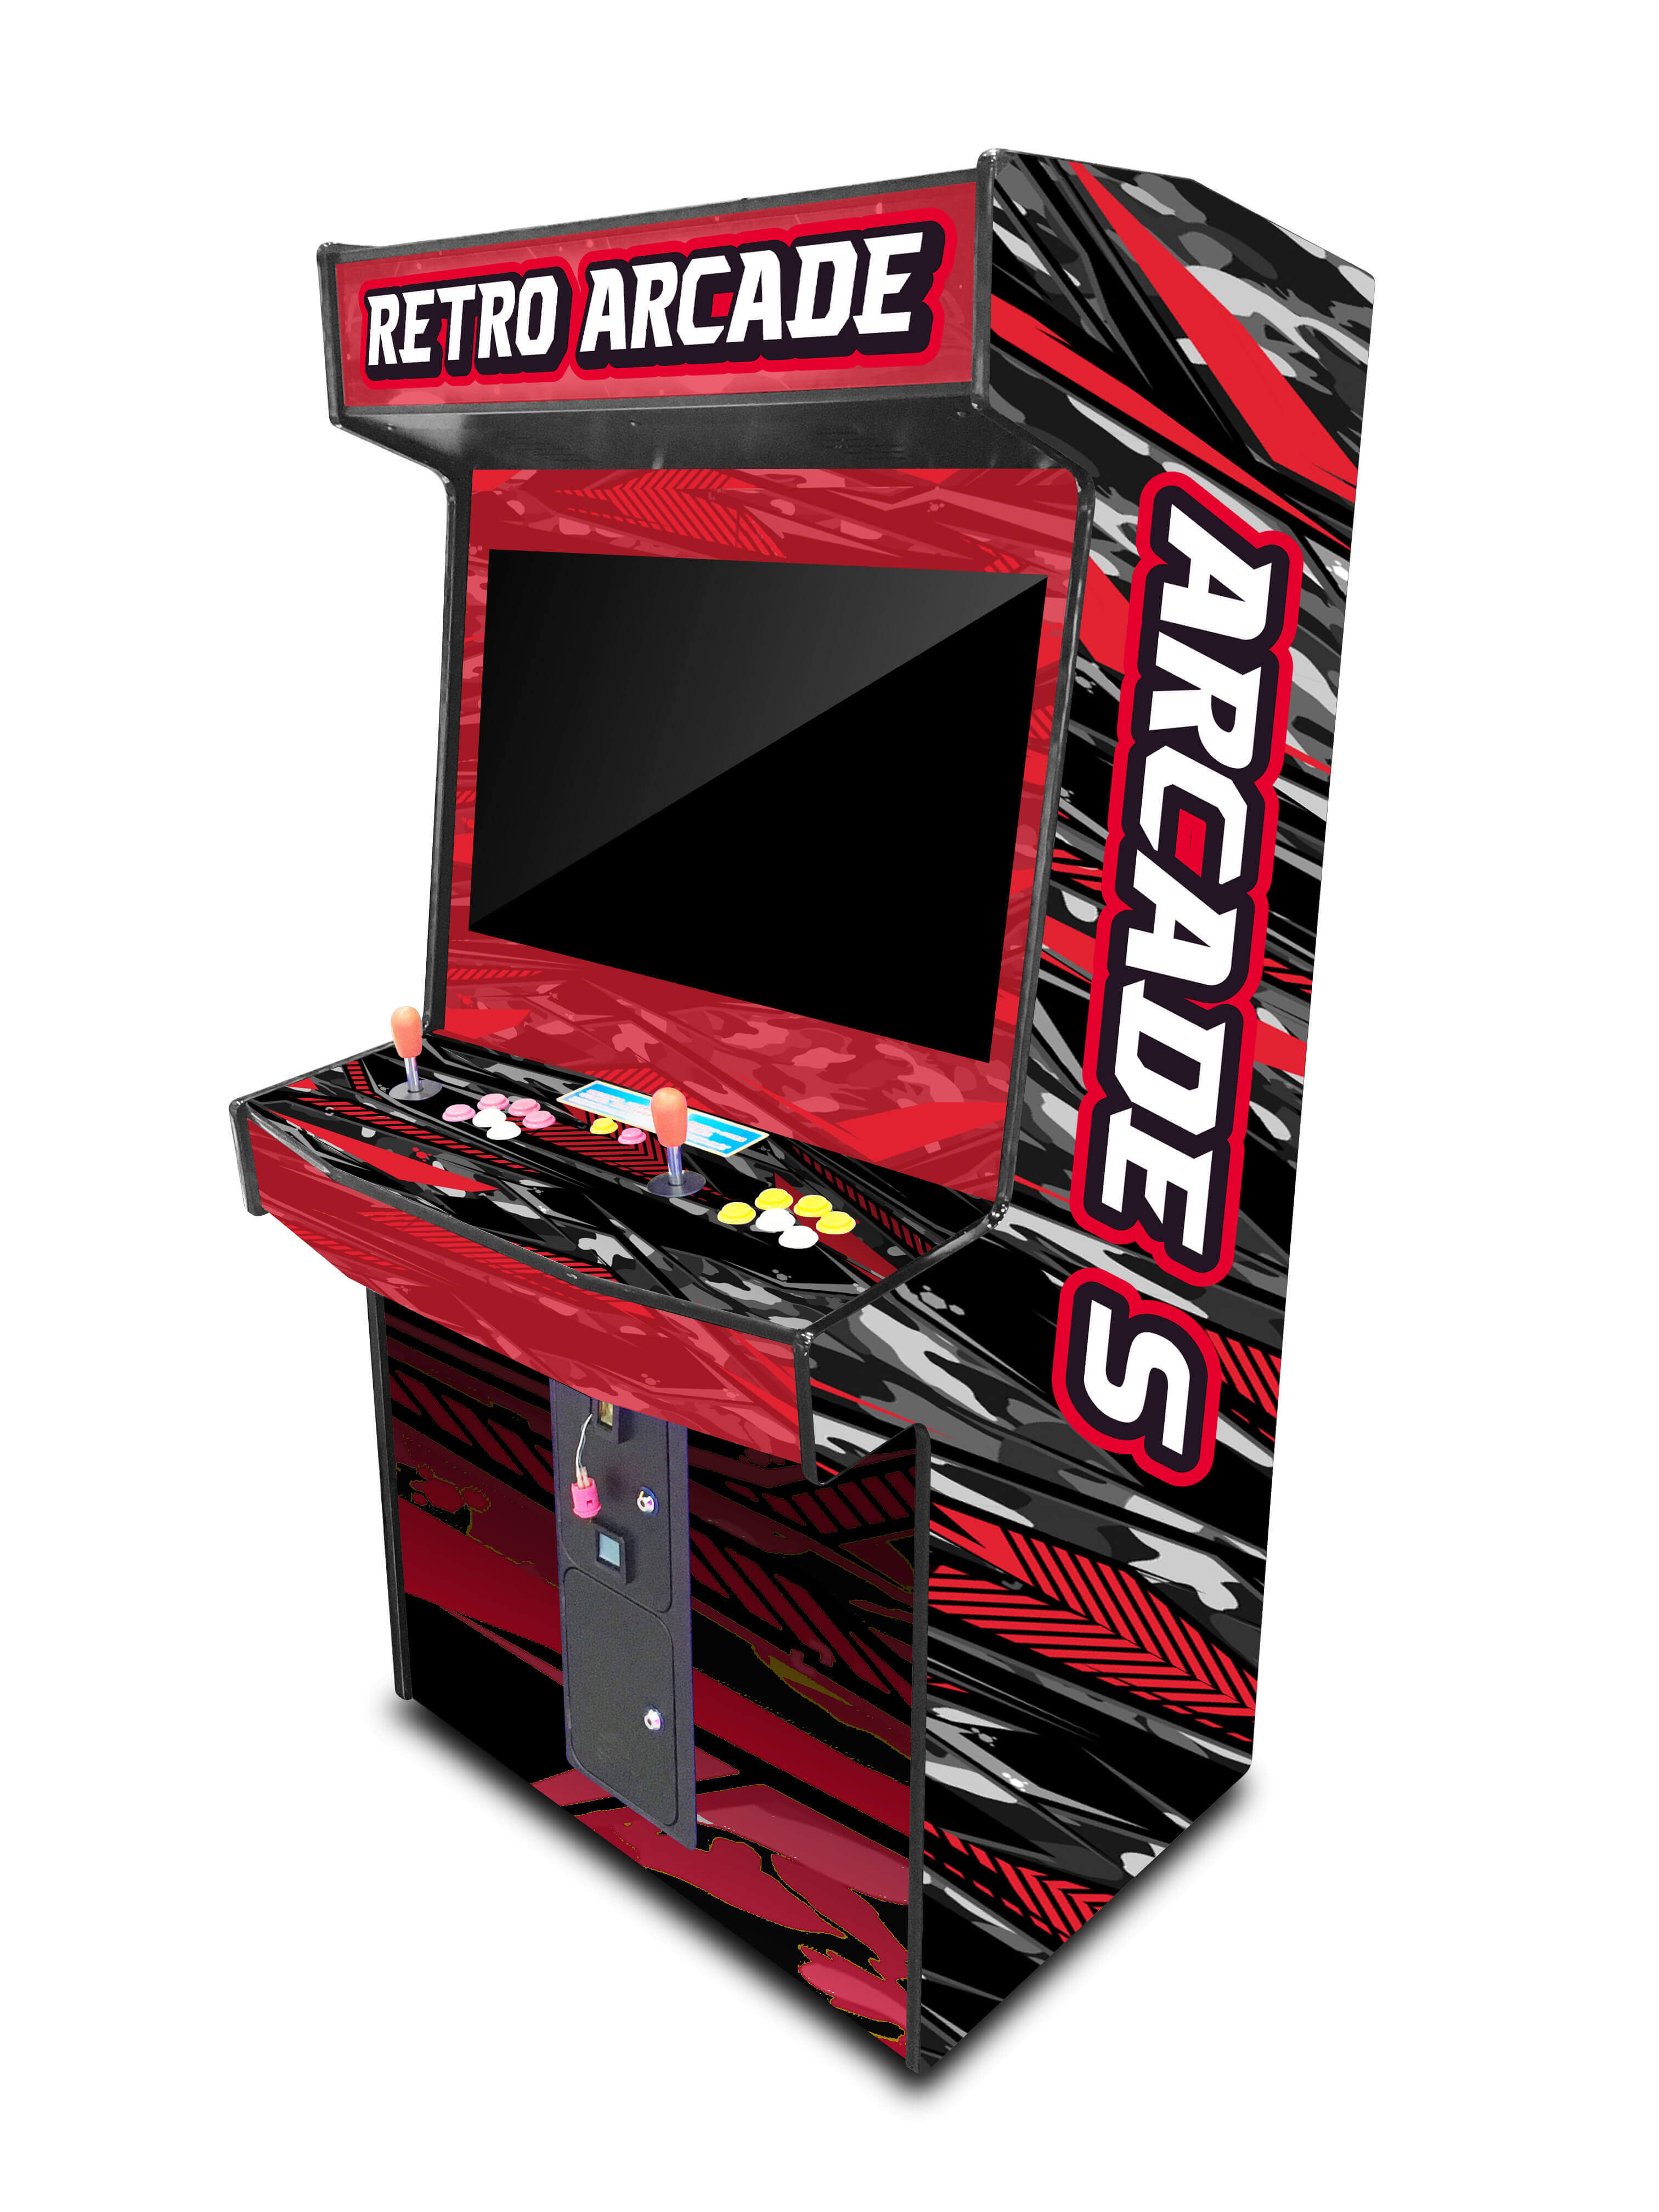 United Asia Entertainments Co., Ltd Provides Latest and Fully-Featured Arcade Game Machines Offering Fantastic Gaming Experience For All Age People